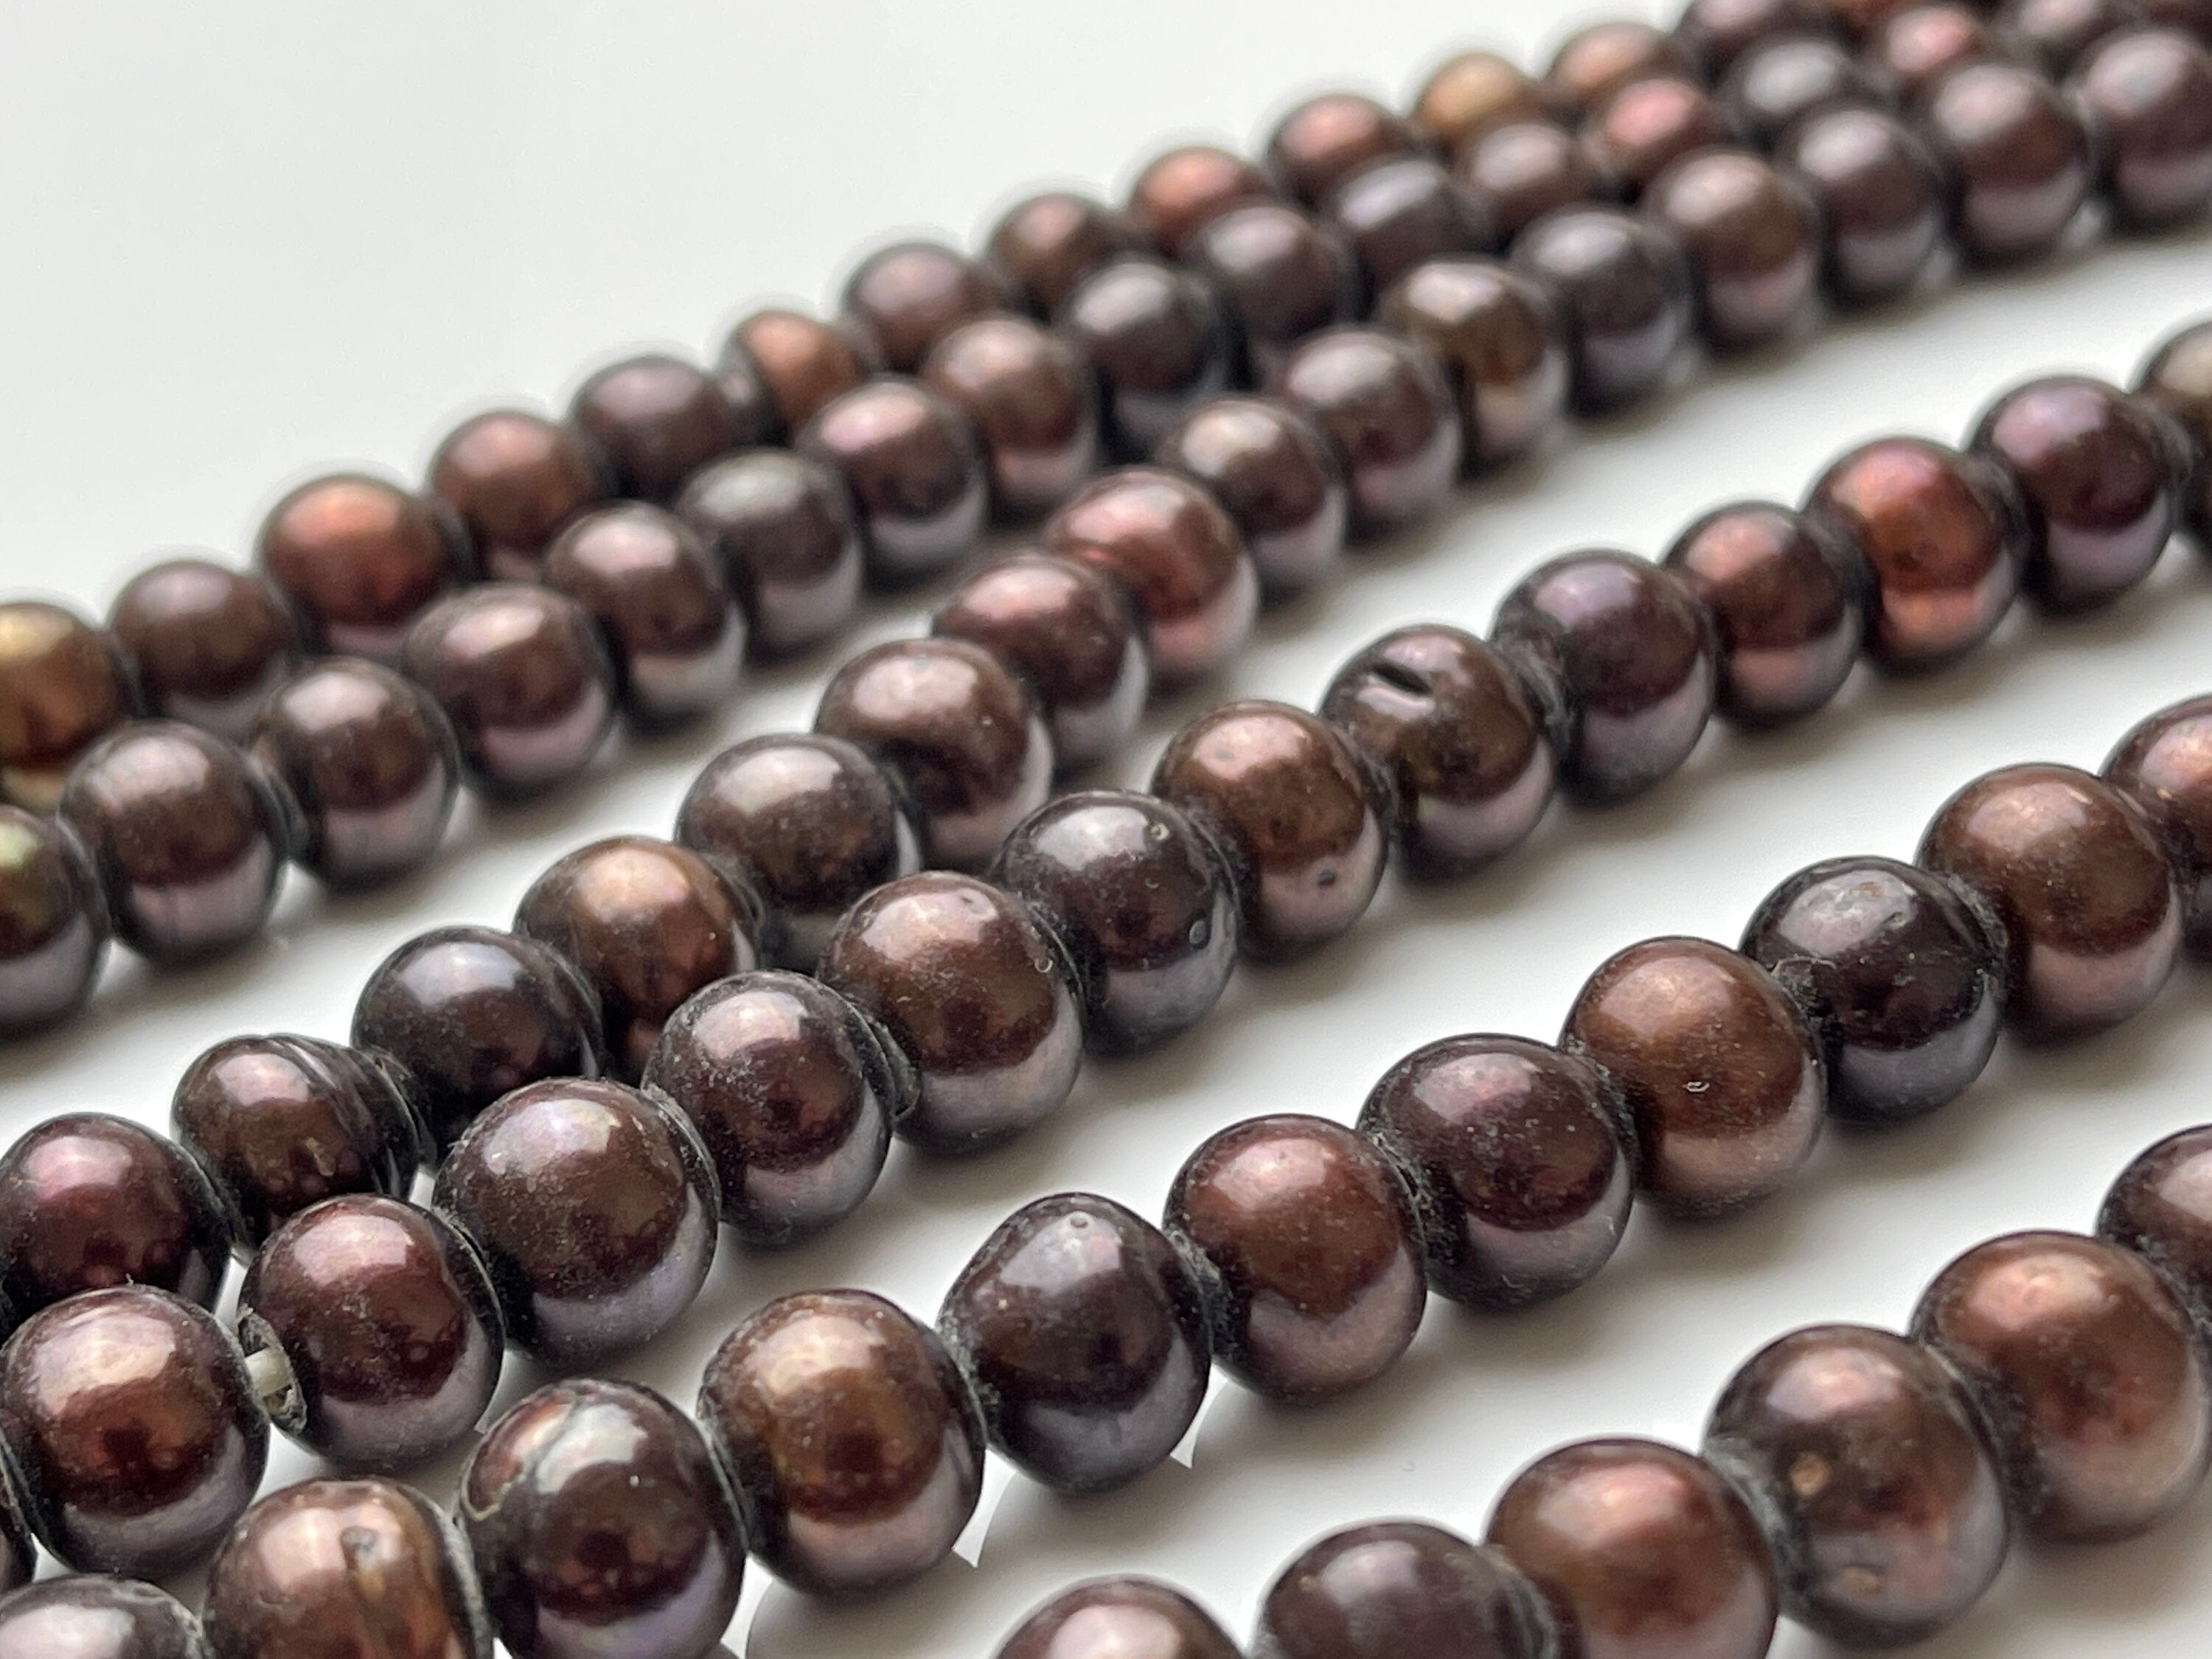 10-16mm rough pearl, fully drilled, natural pearl beads, PB1941